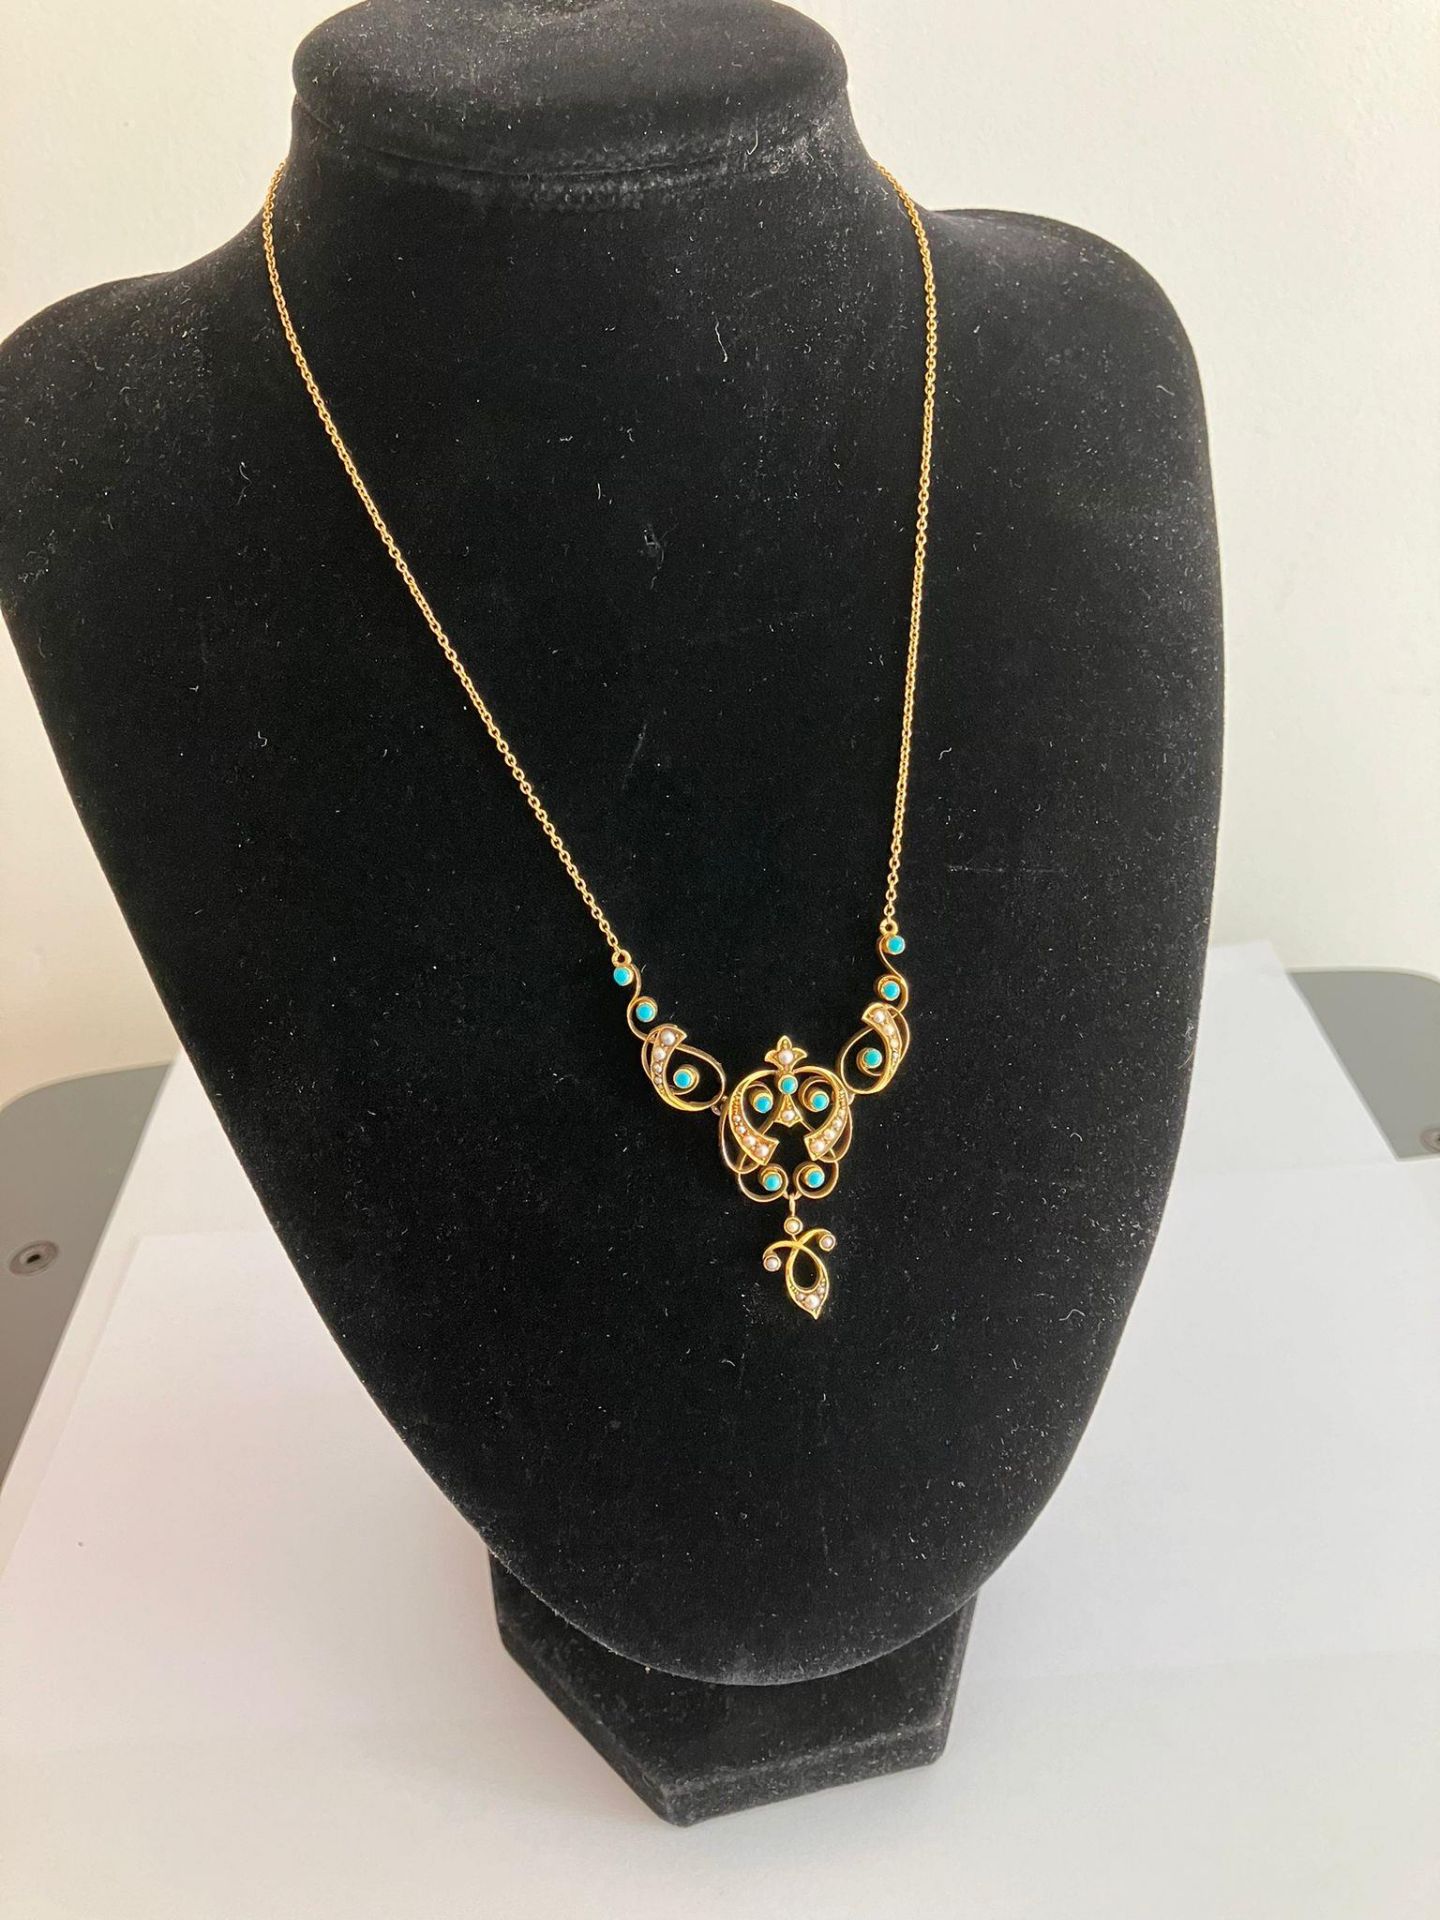 Magnificent Antique Edwardian 15 carat GOLD PENDANT NECKLACE Set with Seed Pearls and Turquoise.